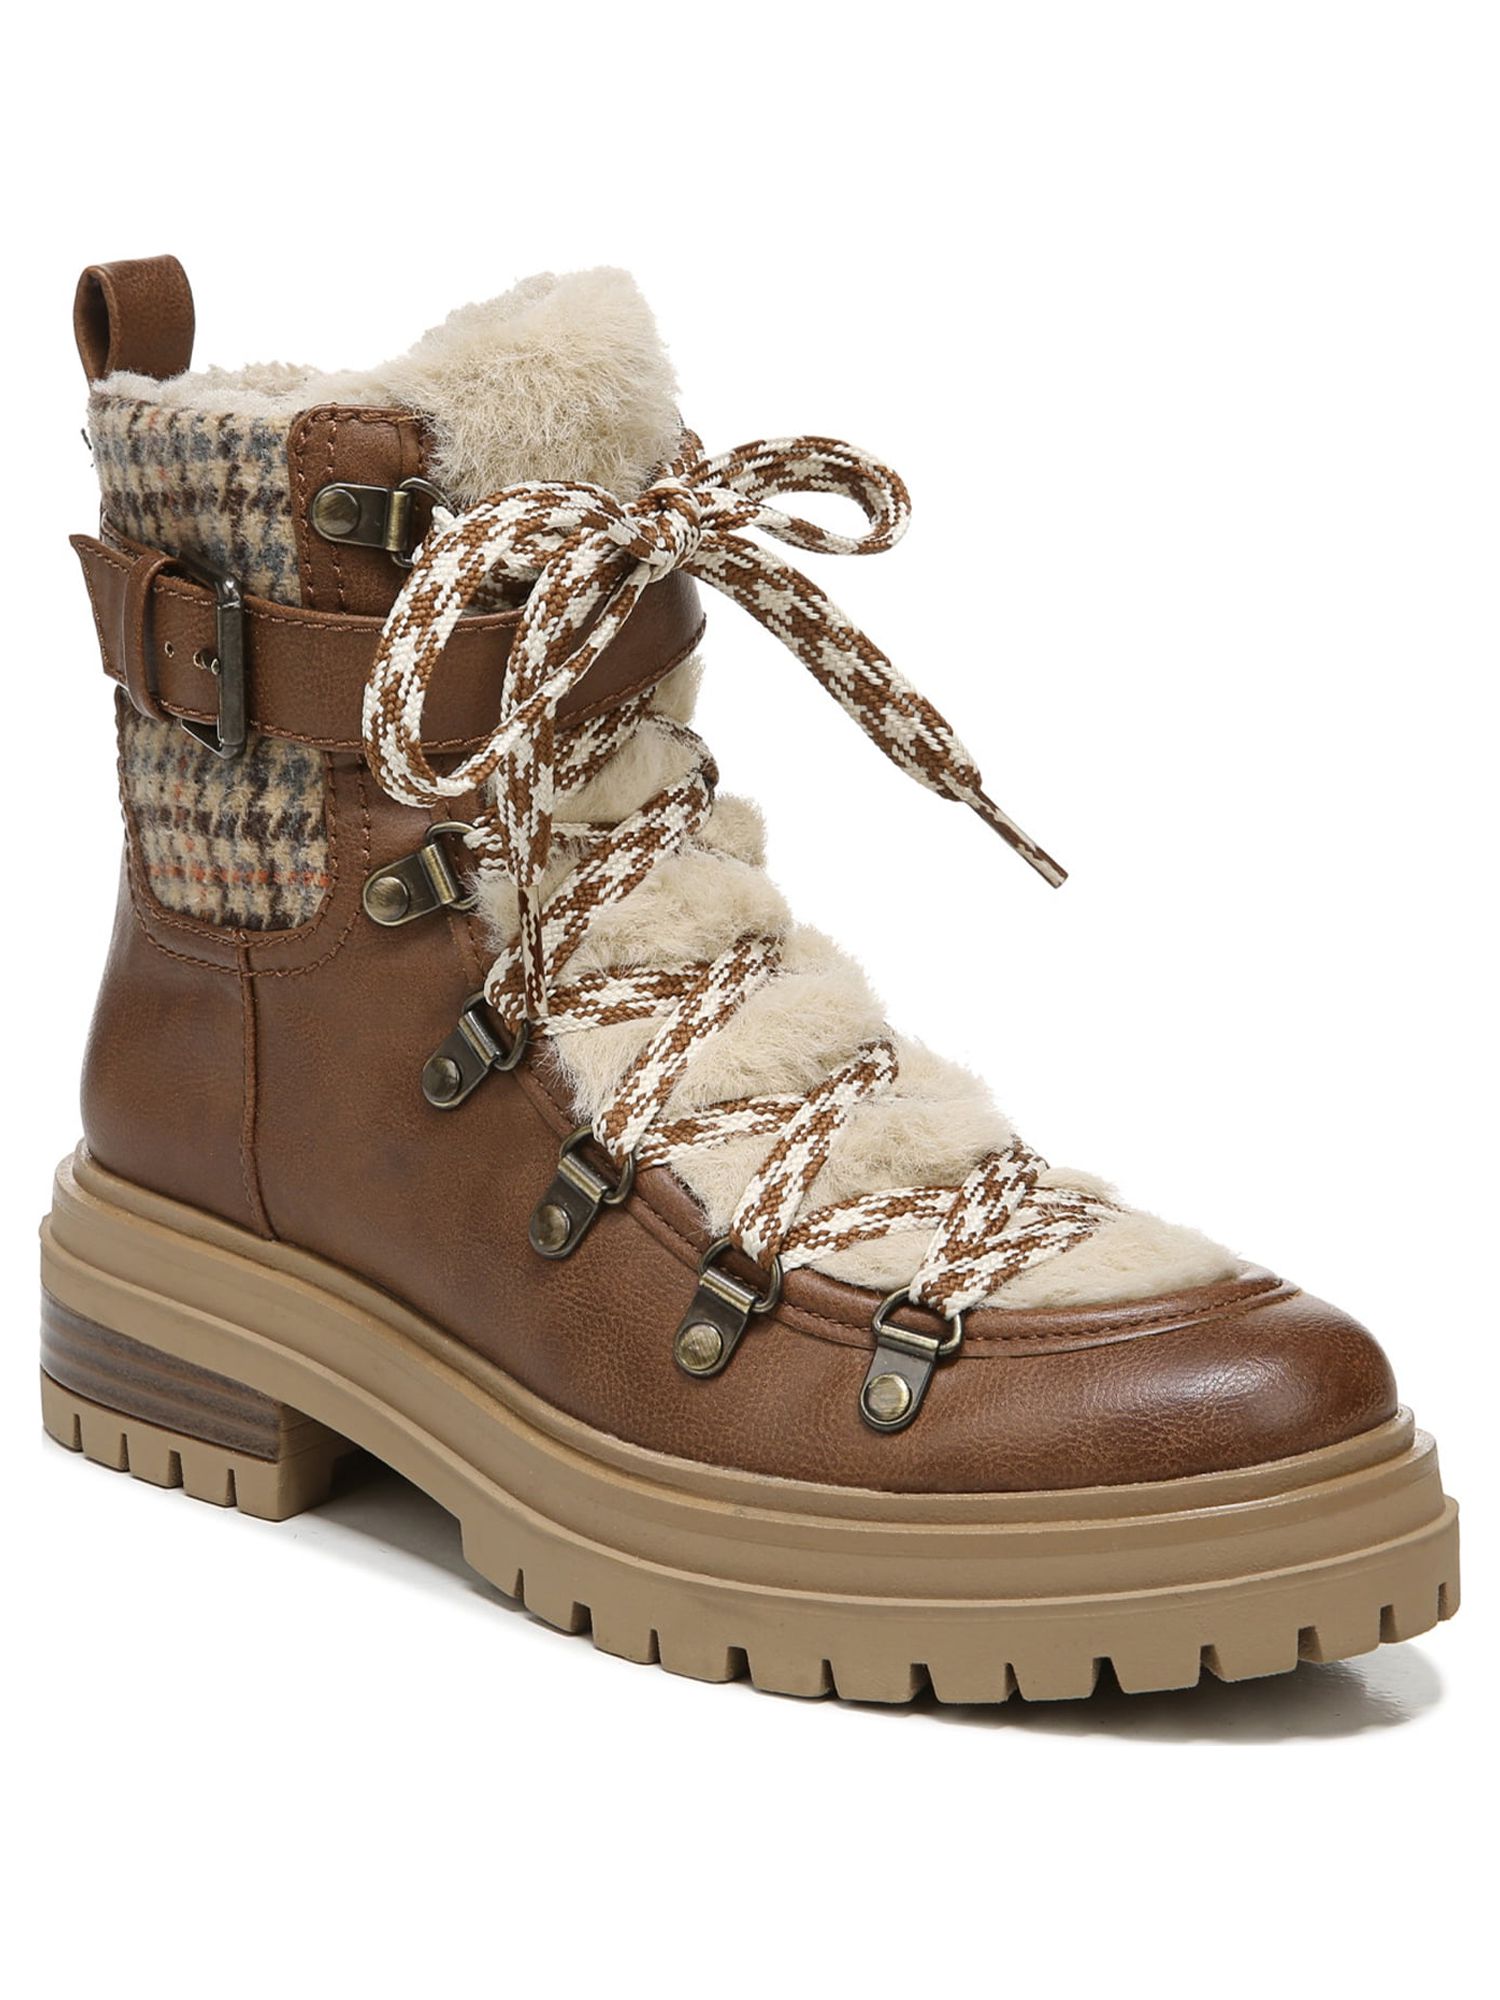 Circus by Sam Edelman Women's Gretchen Shearling Hiker Boot - image 1 of 5